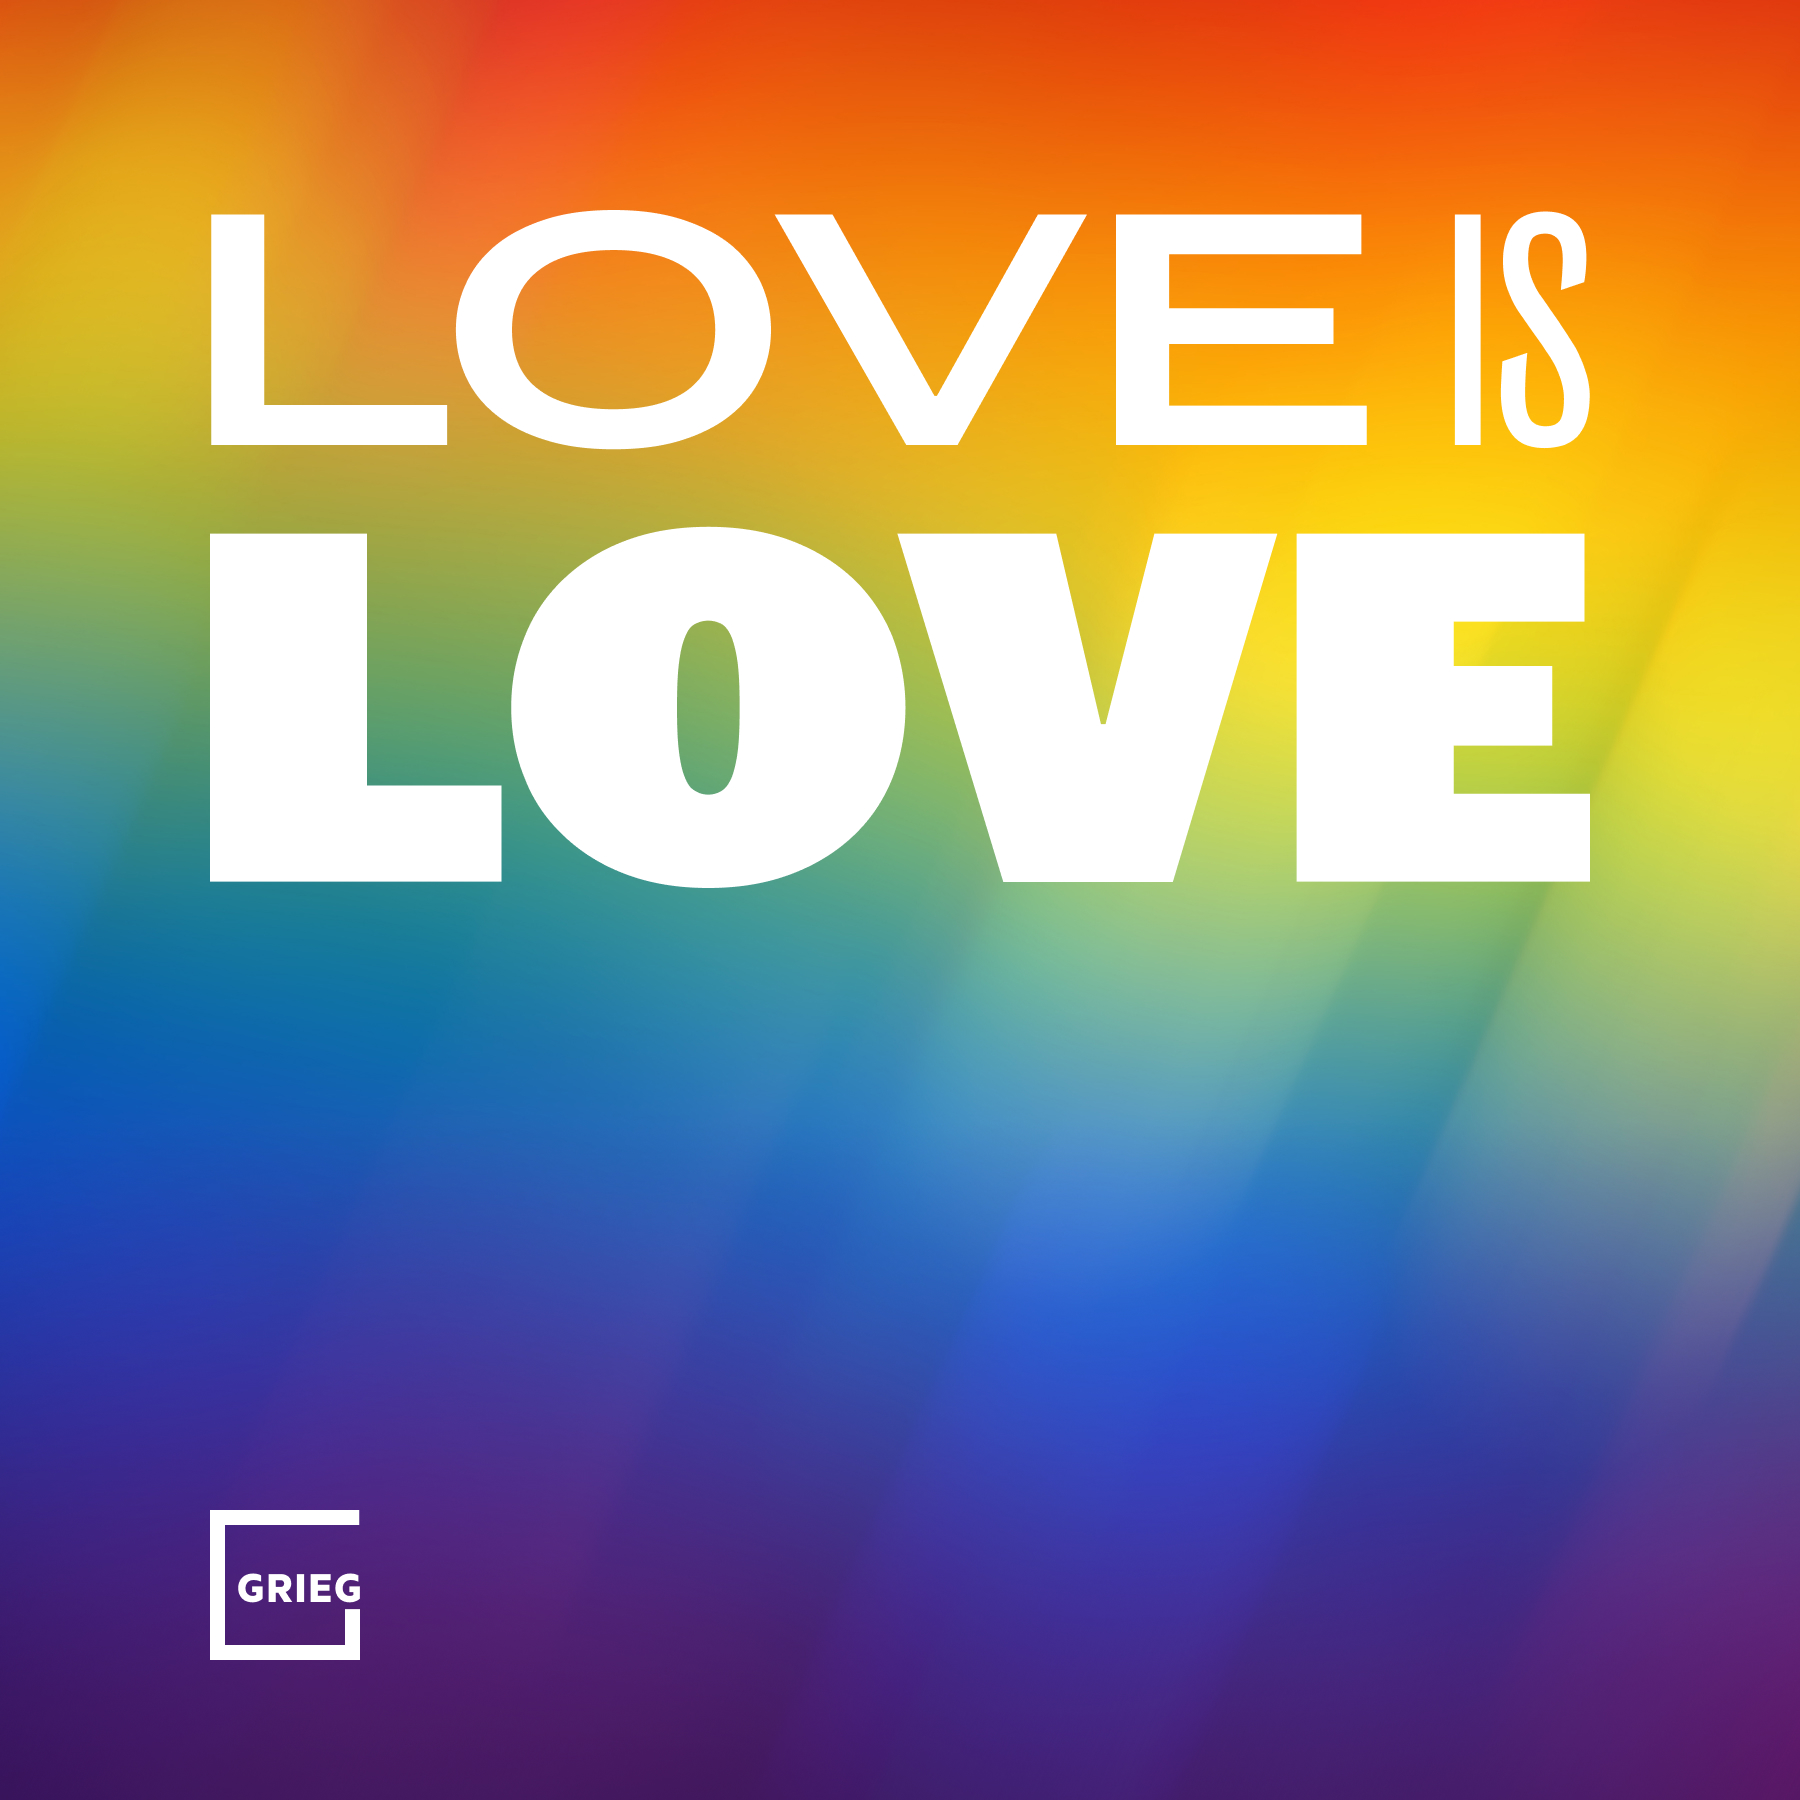 Pride poster with a rainbow gradient - Love is love